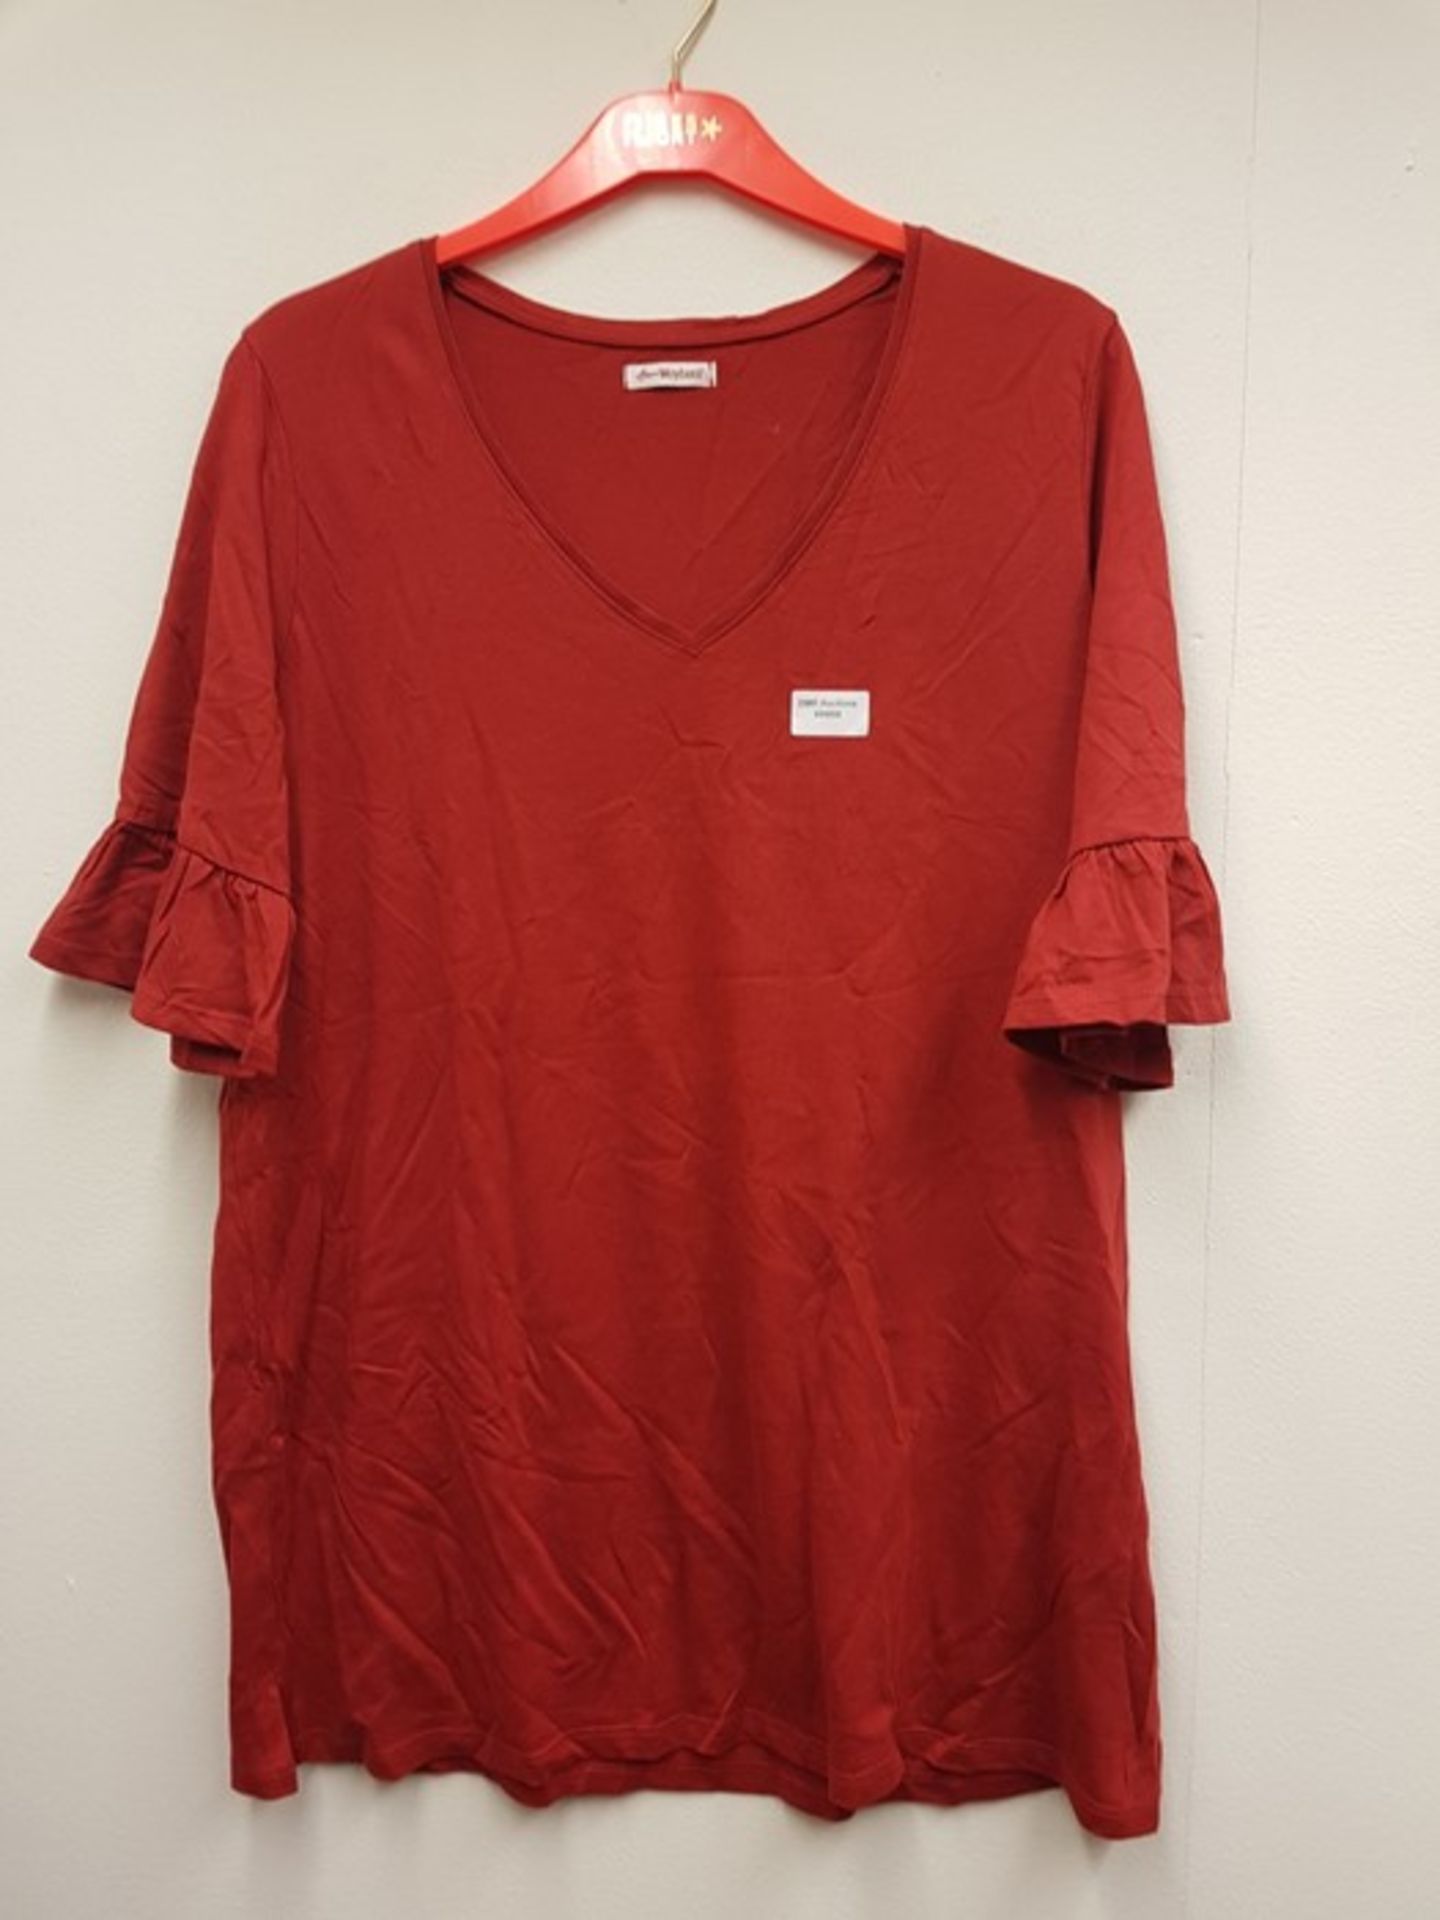 1 AS NEW ANNE WEYBURN LADIES T-SHIRT IN RED / SIZE